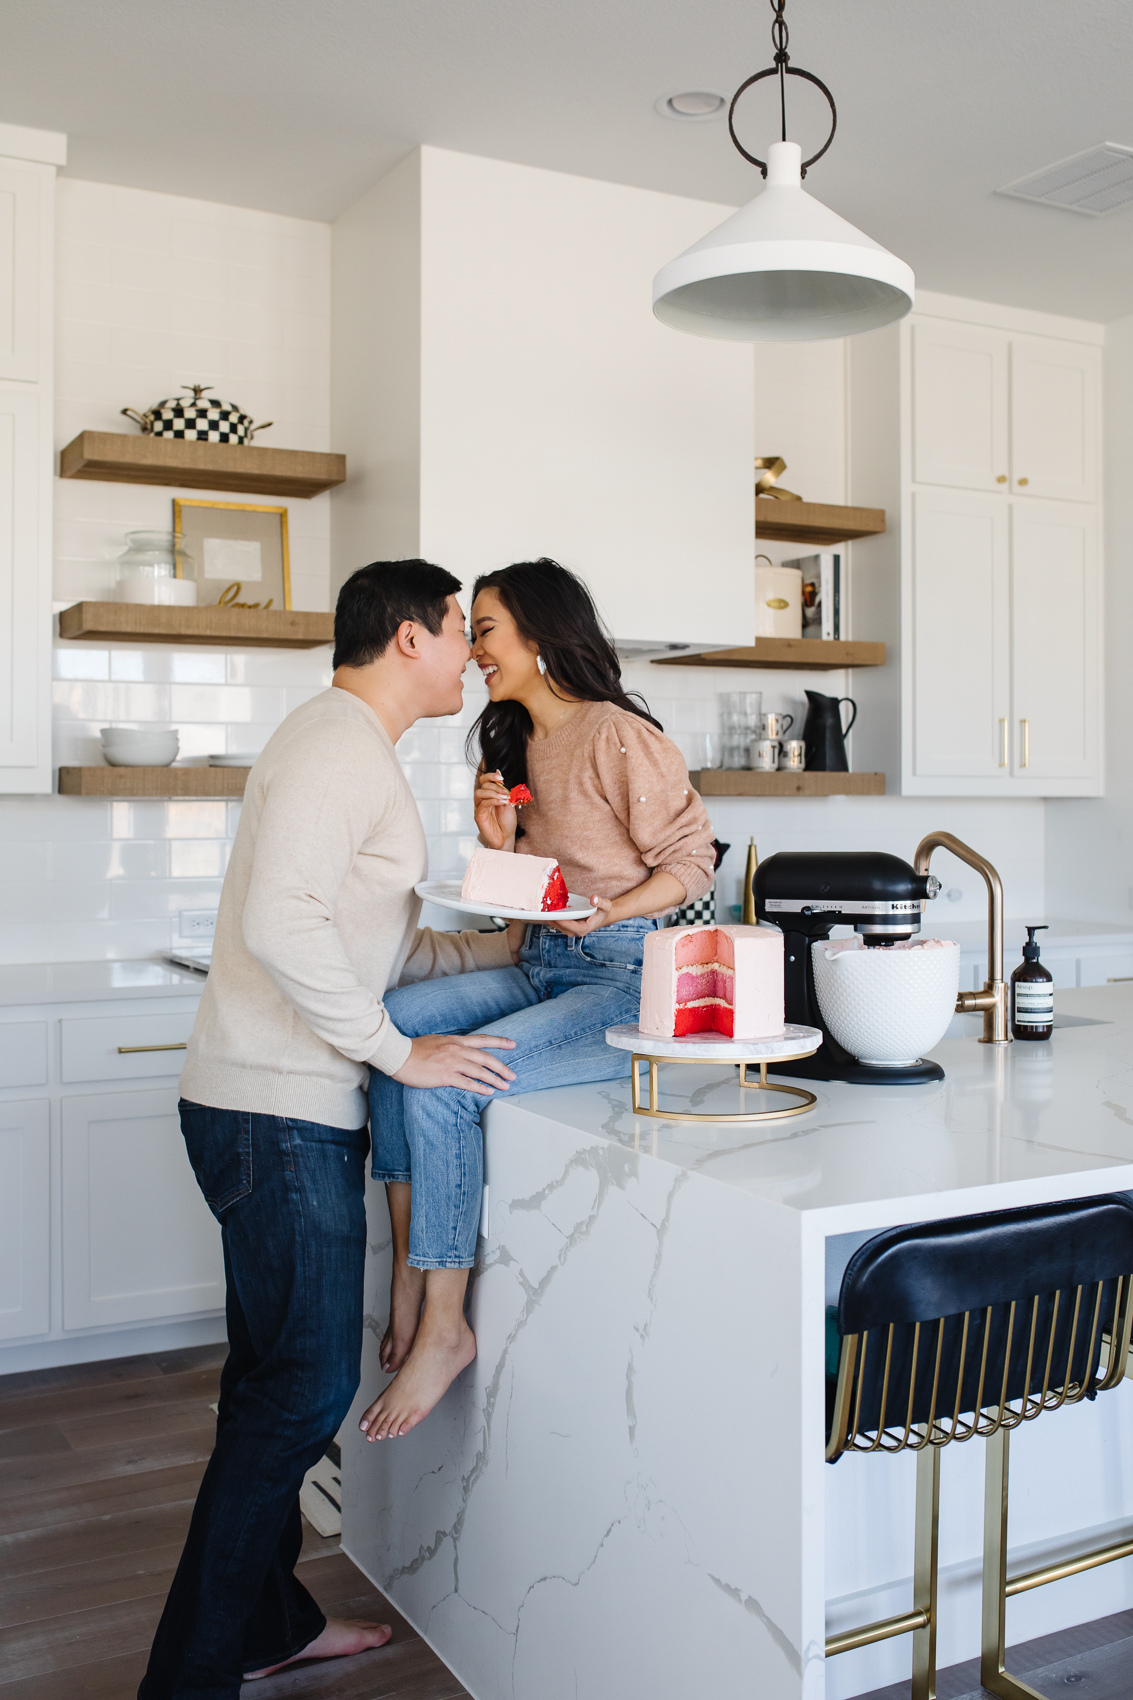 Blogger Hoang-Kim and her fiance Johnny enjoy a slice of ombre cake in their white transitional kitchen with a waterfall island